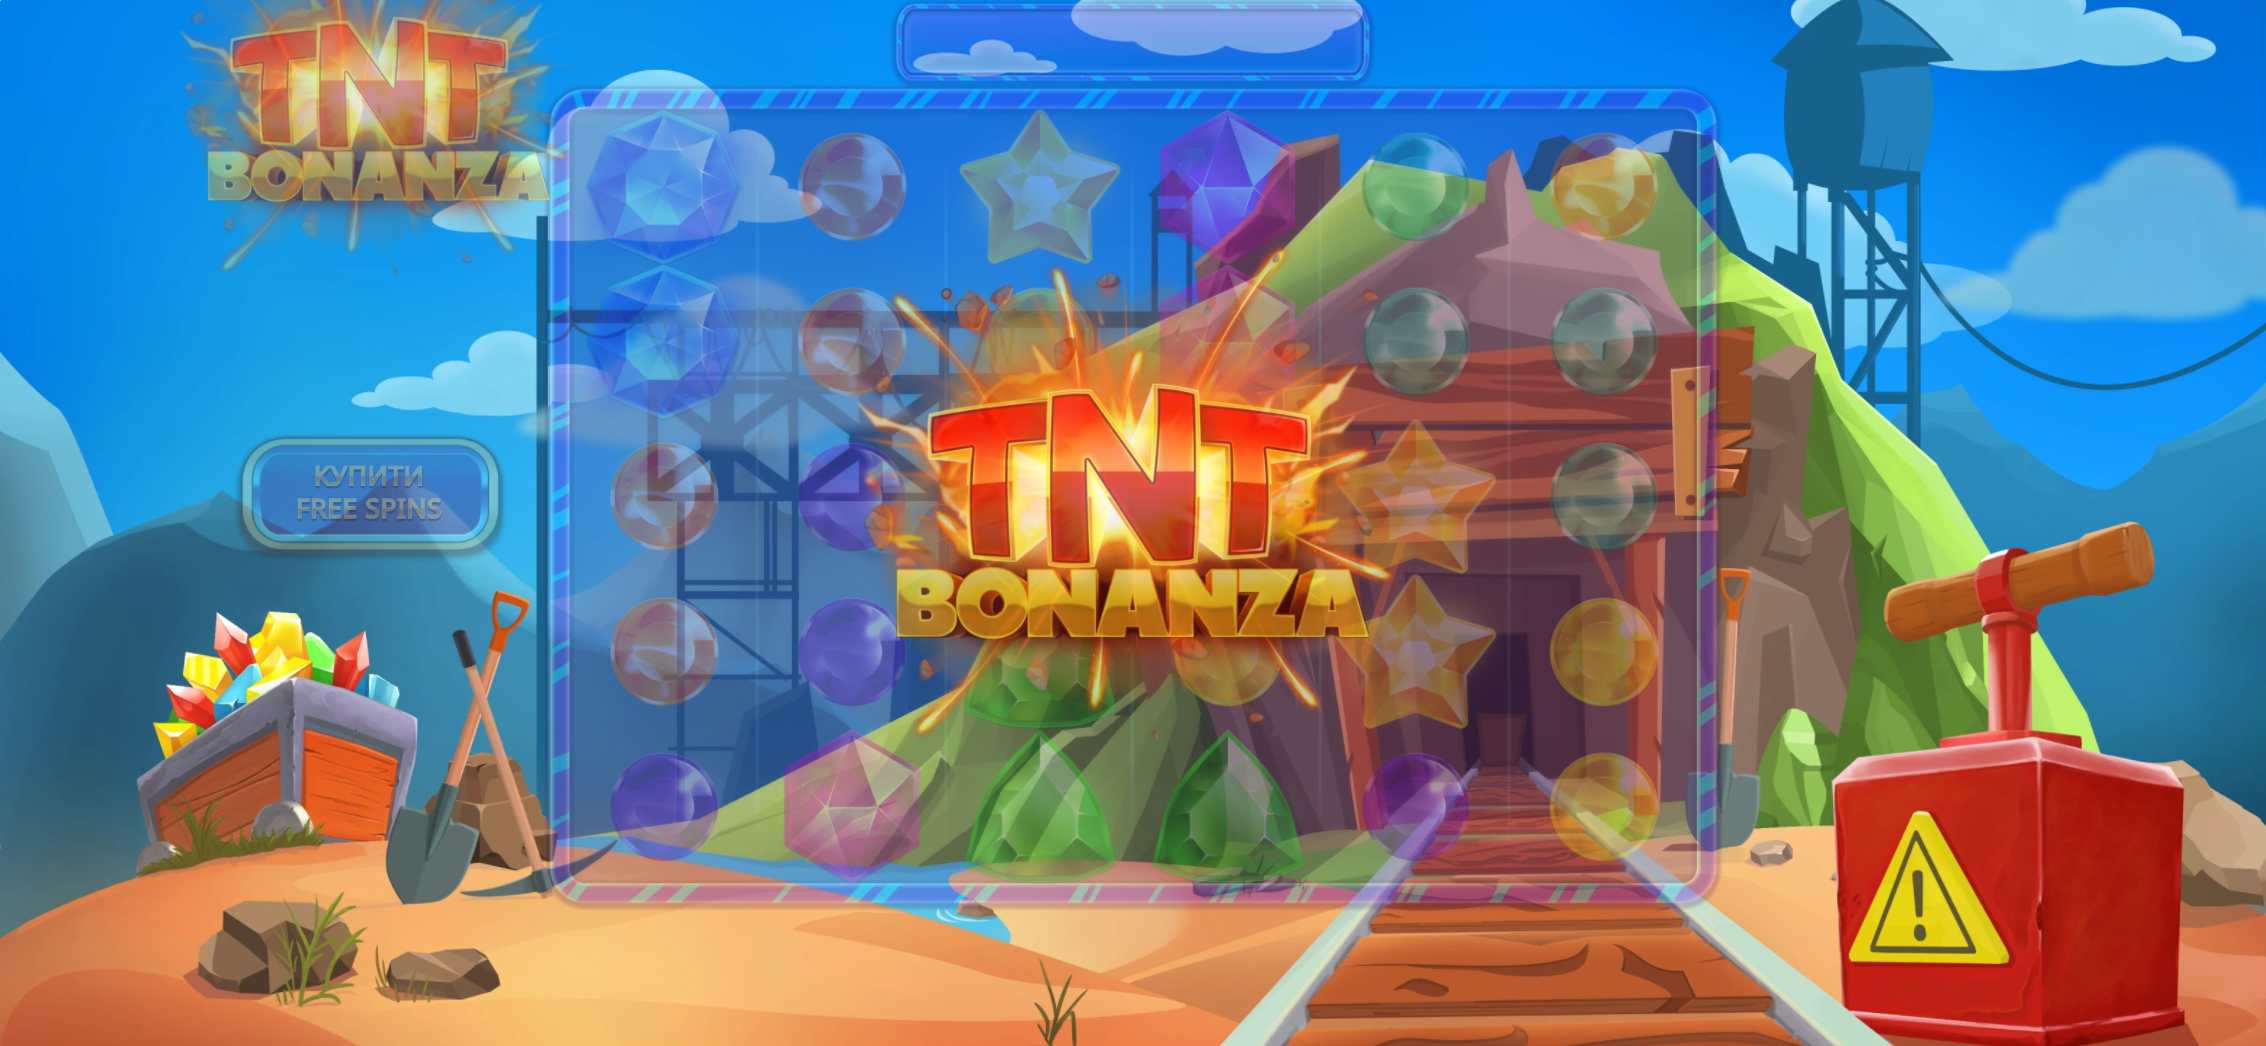 Play TNT Bonanza Slot Game and Explode Your Winnings! reliable site